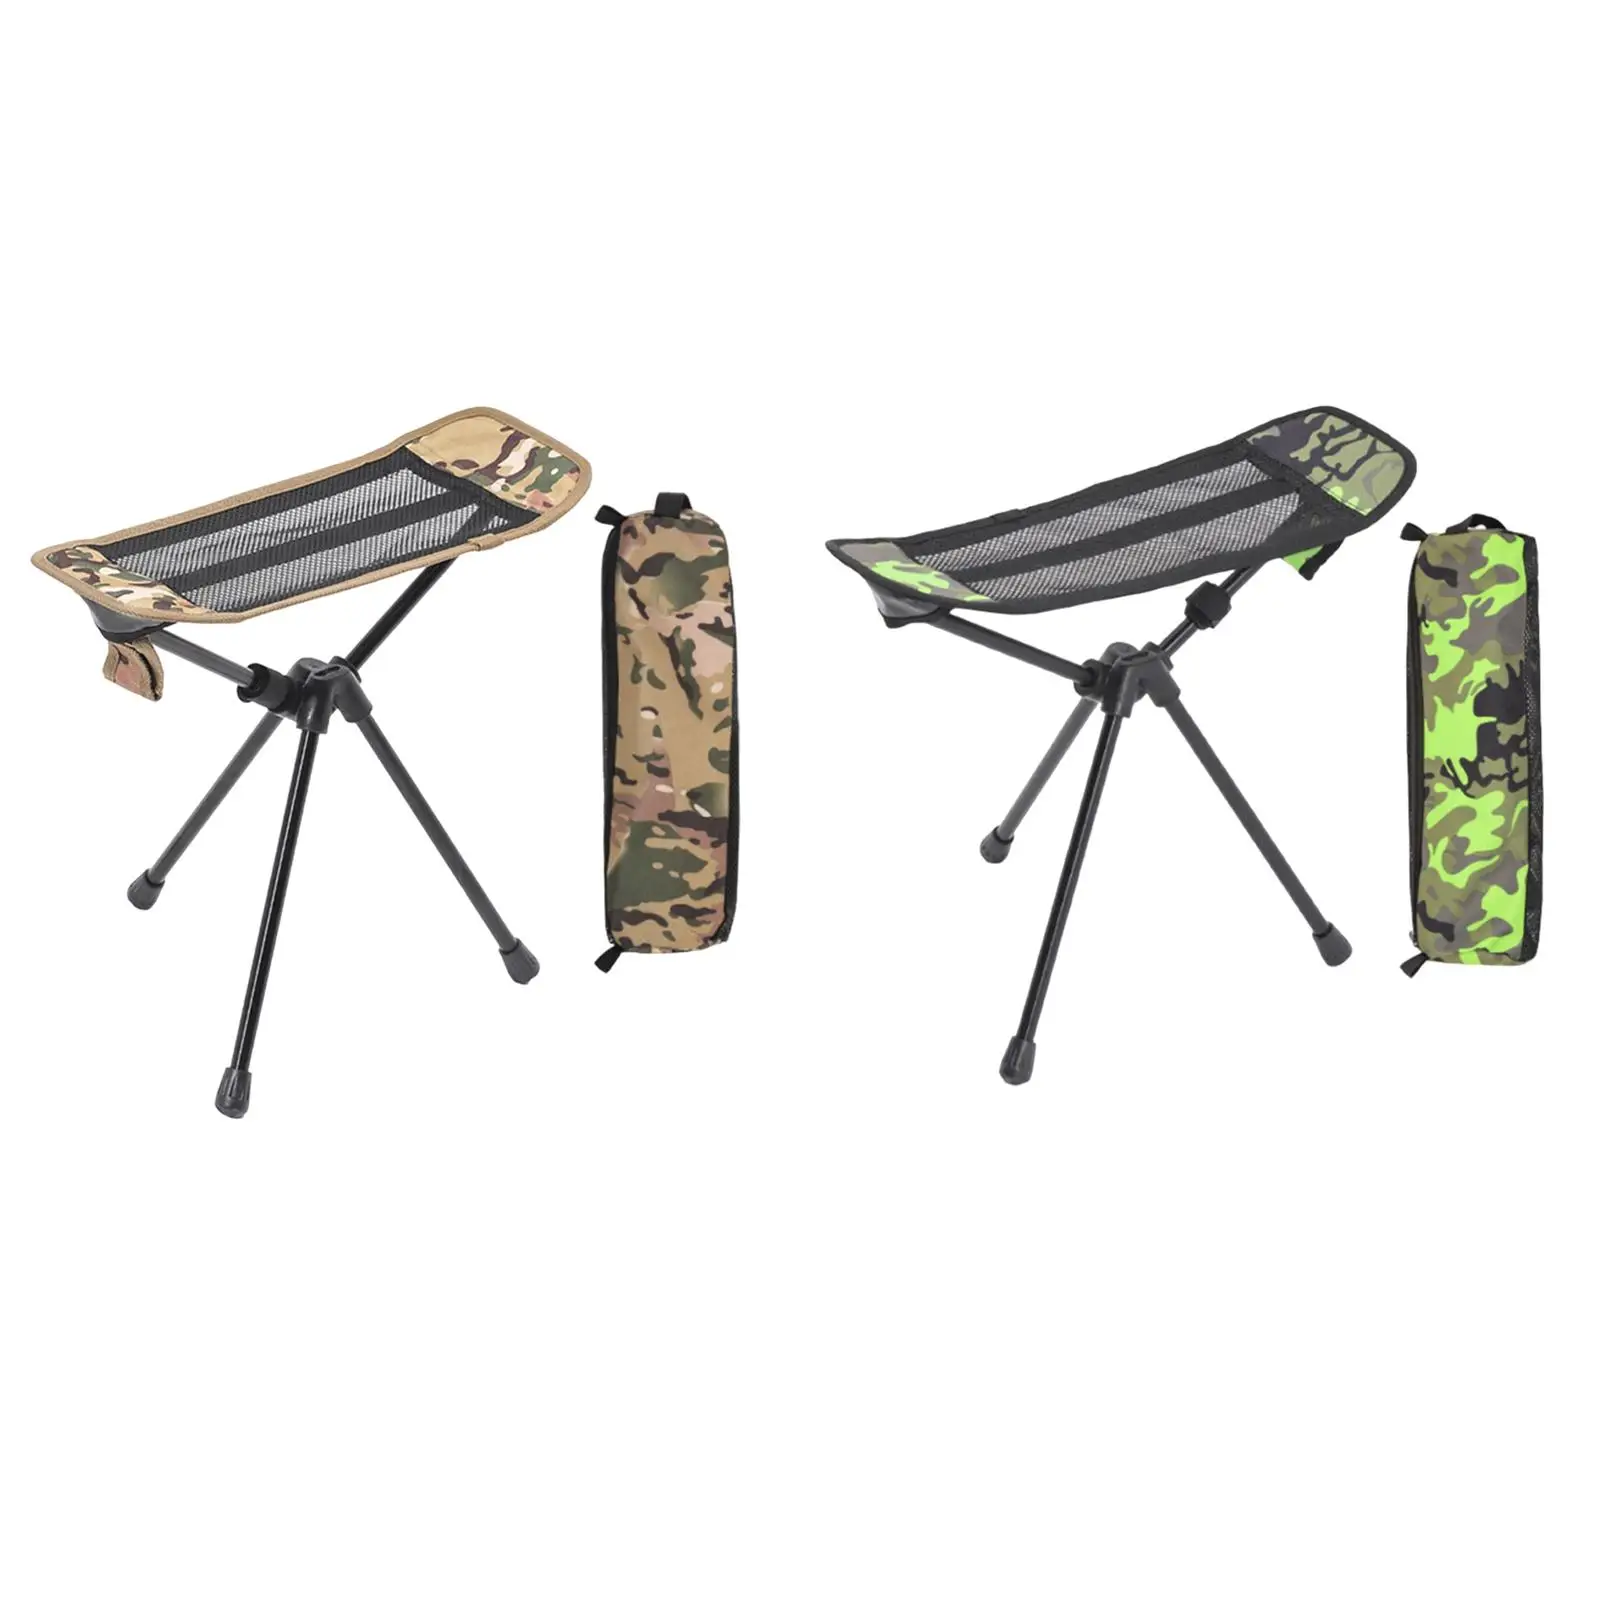 Portable Footstool Folding Chair Stool Lightweight Stools Slacker Chair with